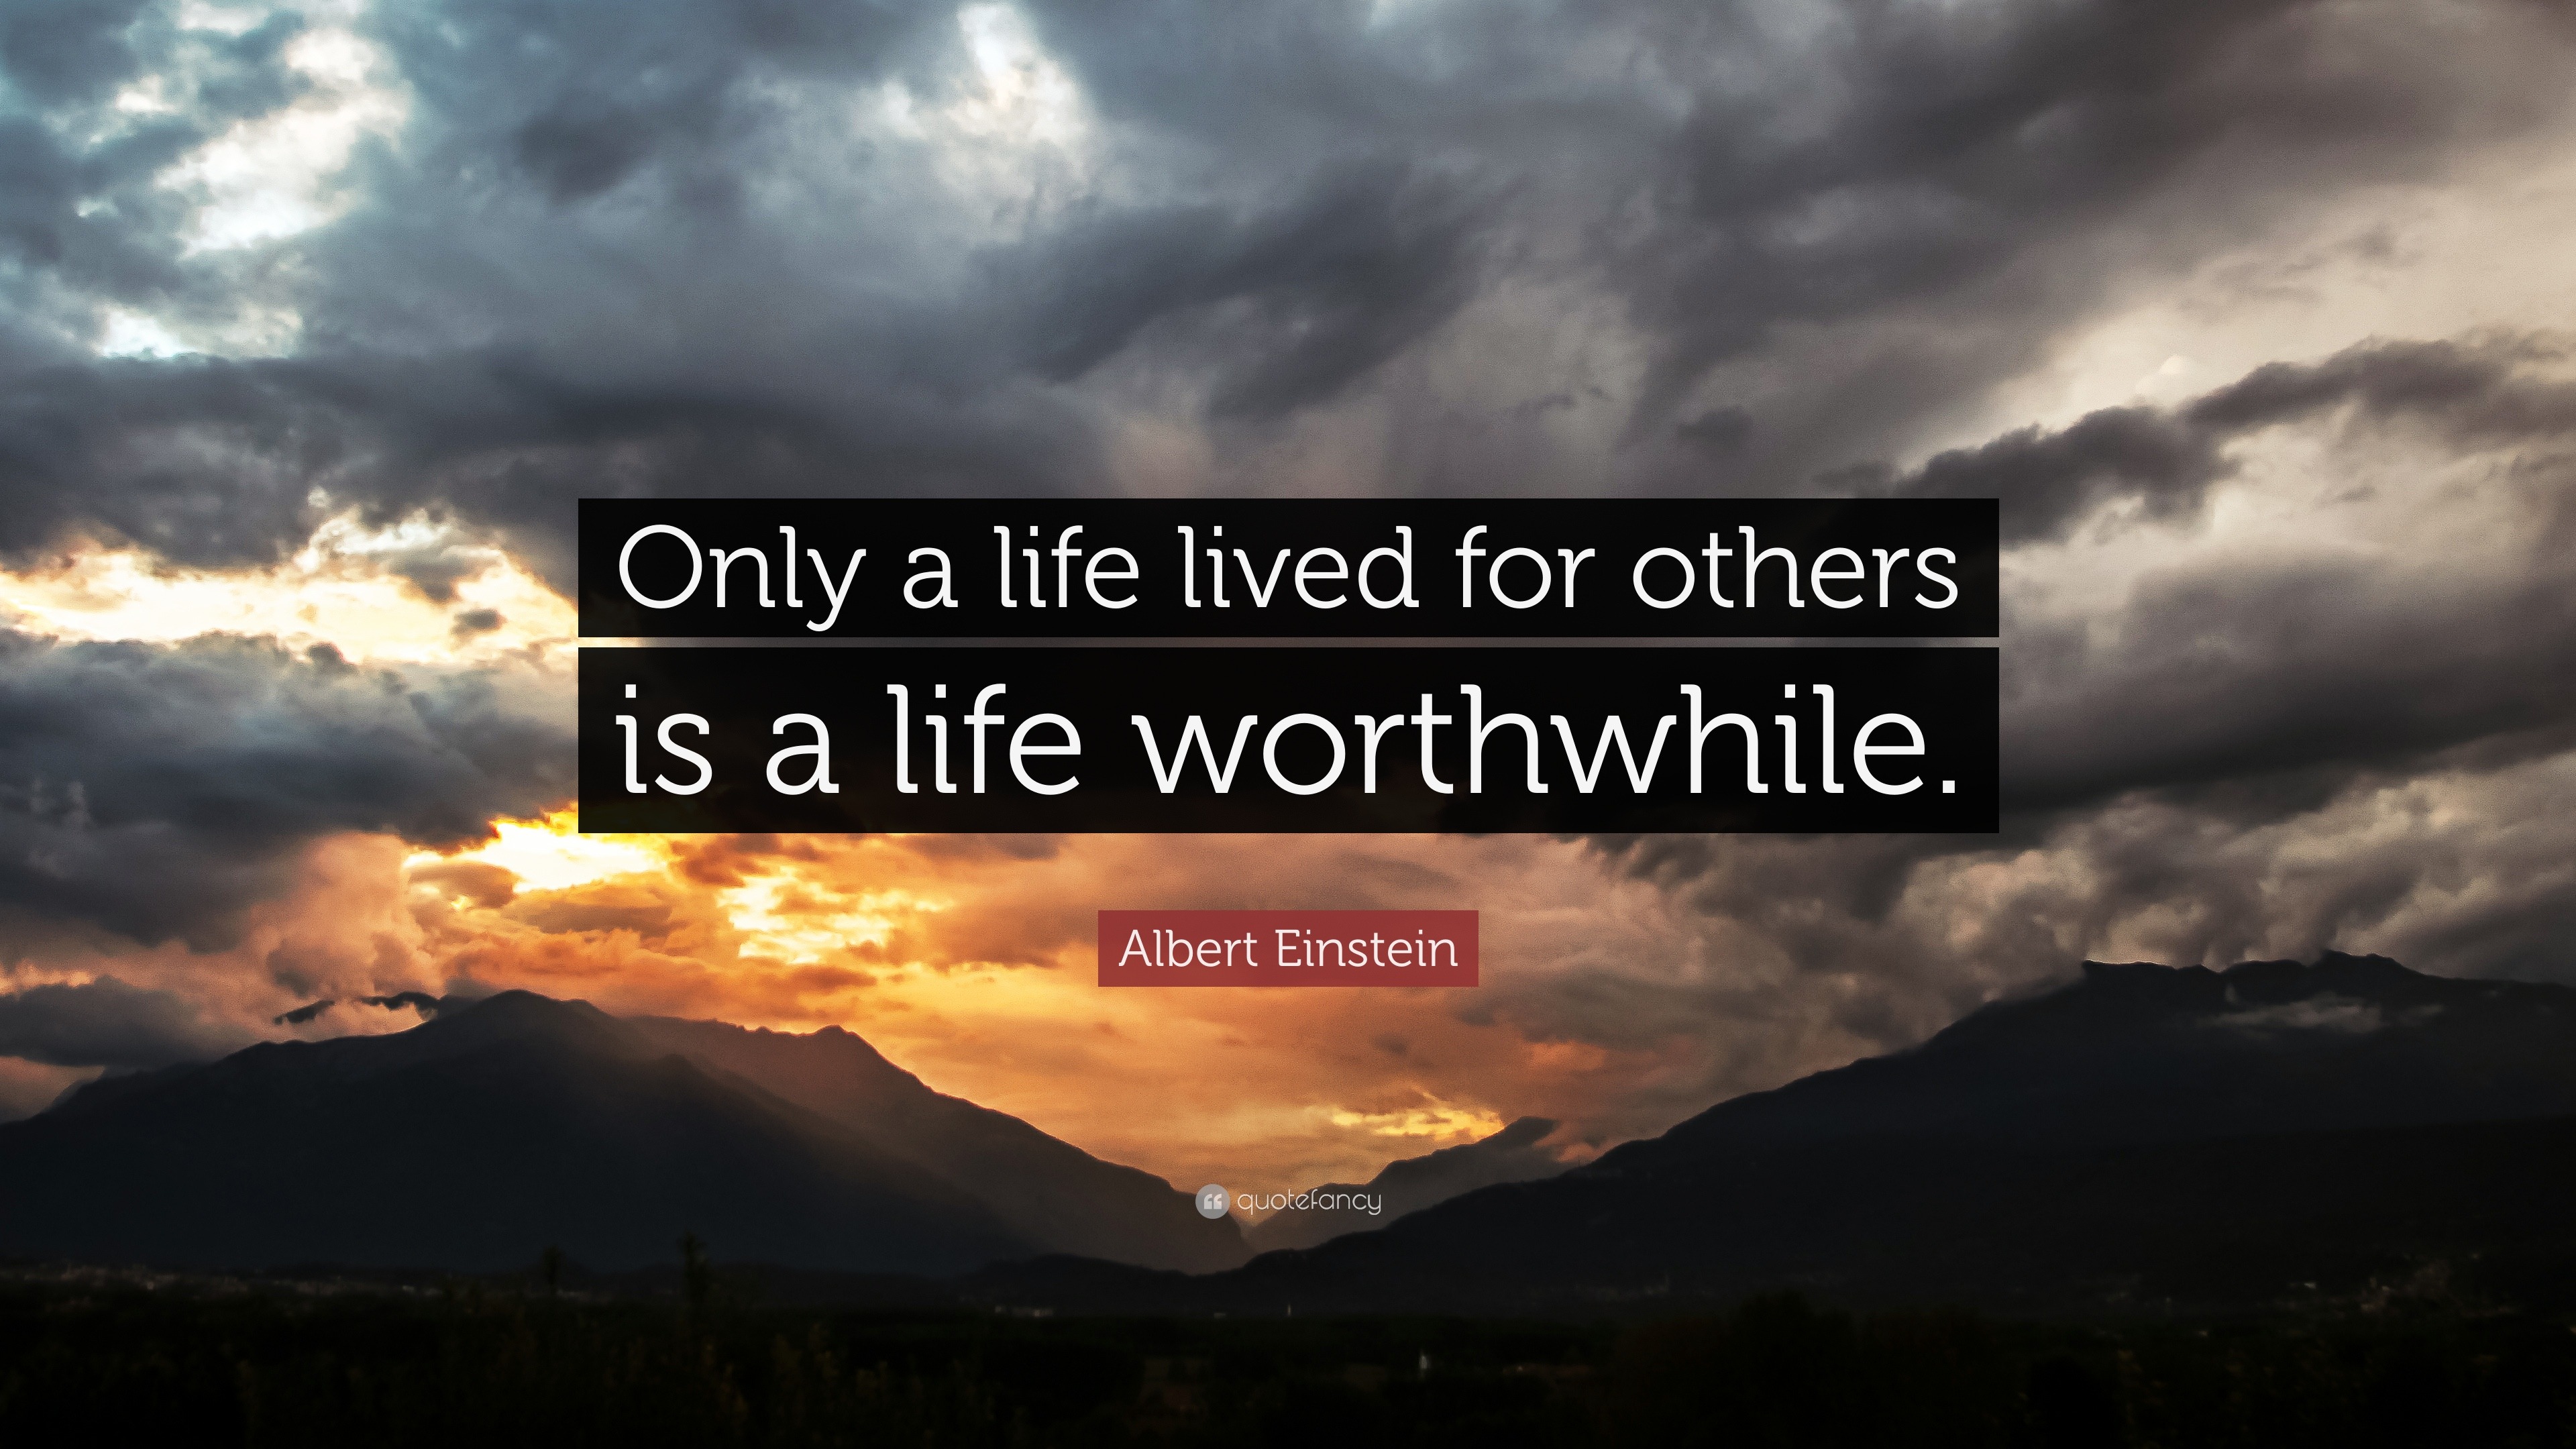 Albert Einstein Quote: "Only a life lived for others is a ...